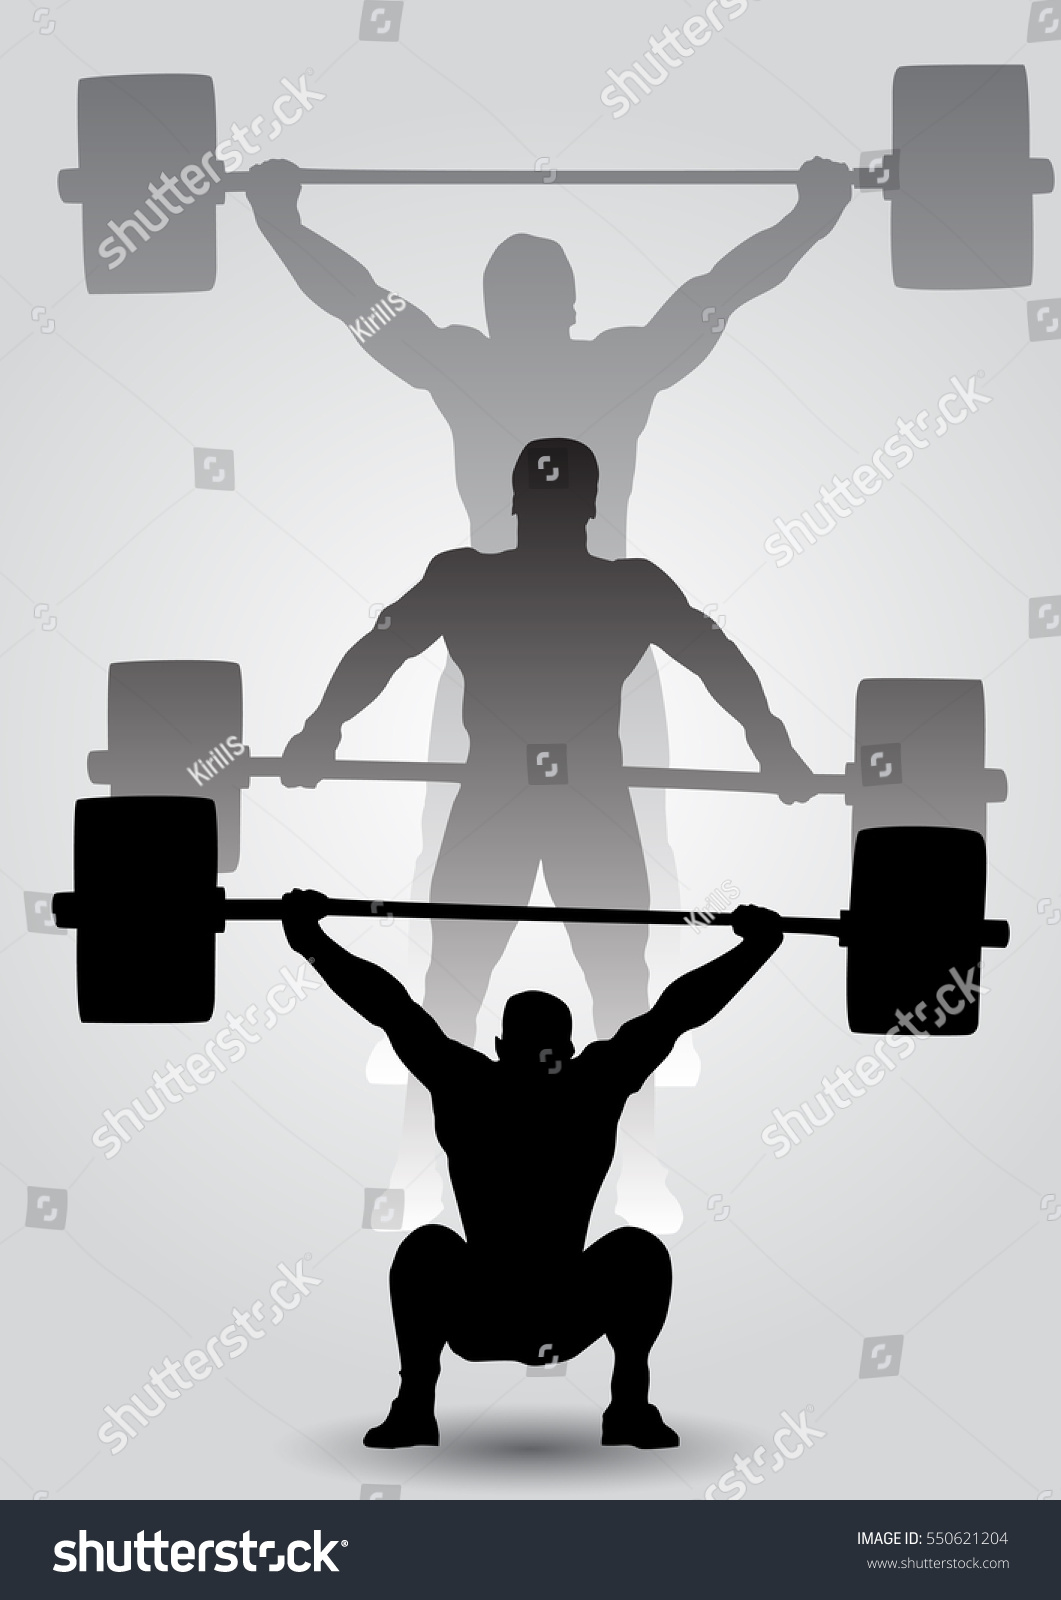 SVG of  Olympic games, Tokyo 2021 Weightlifter is sitting with barbell. Snatch. three silhouettes of athletes doing snatch exercise. weightlifting. svg